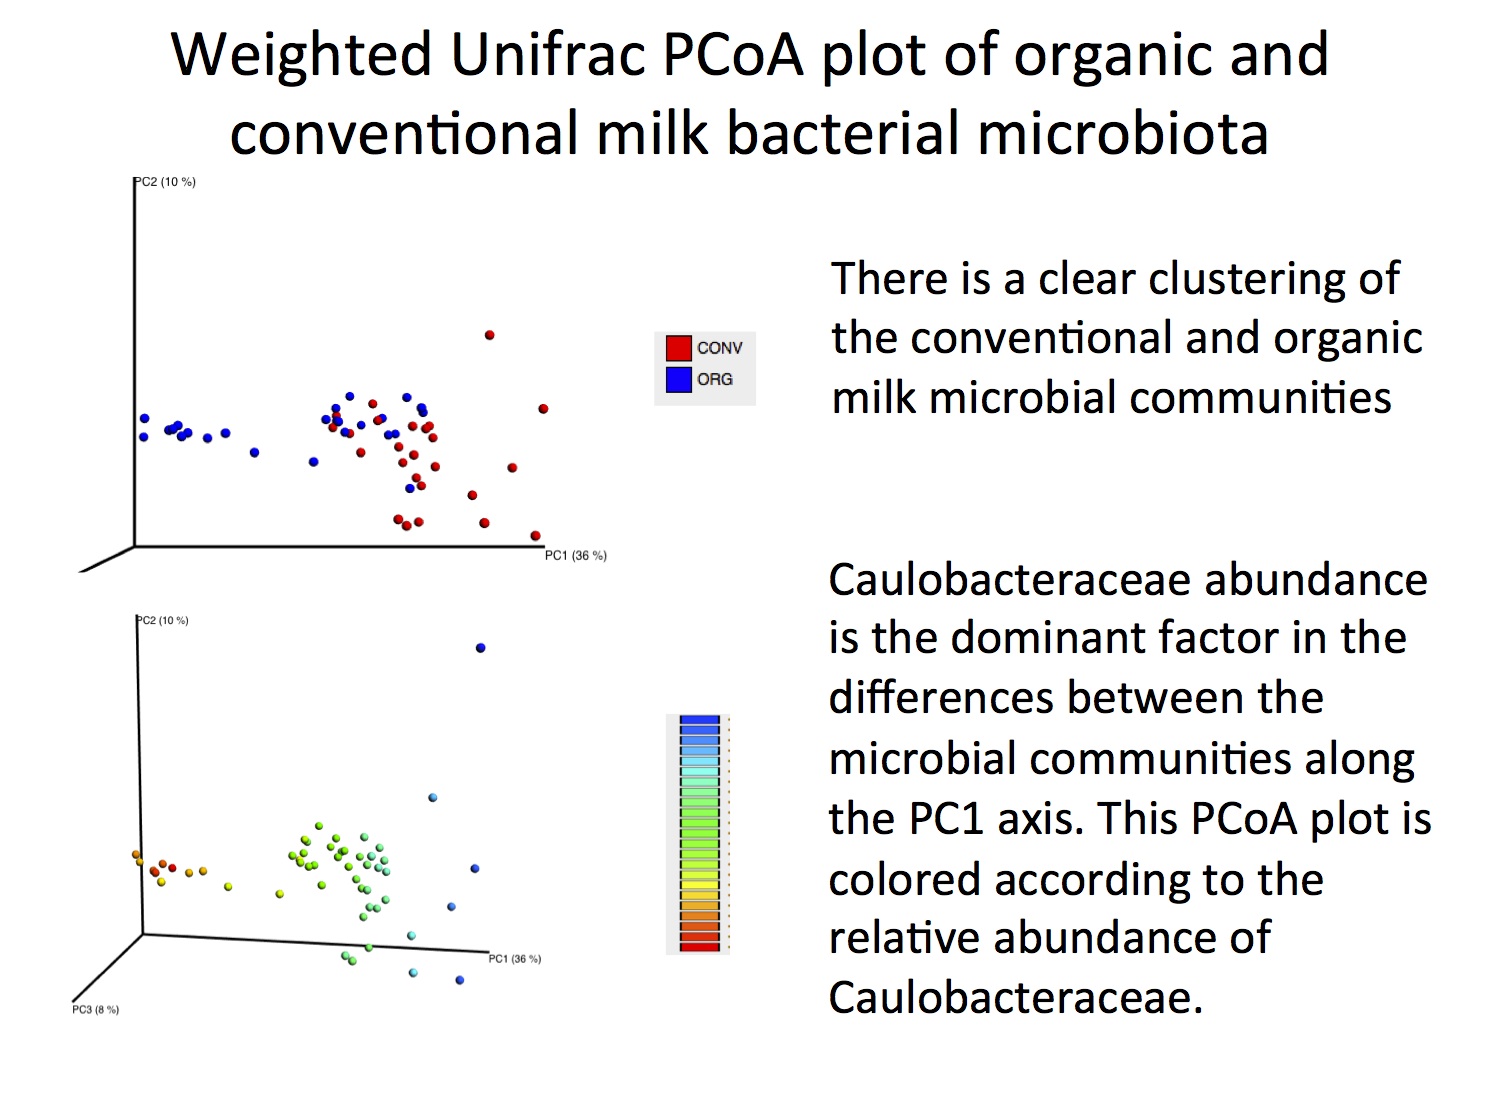 Weighted Unifrac PCoA plot of organic and conventional milk bacterial microbiota